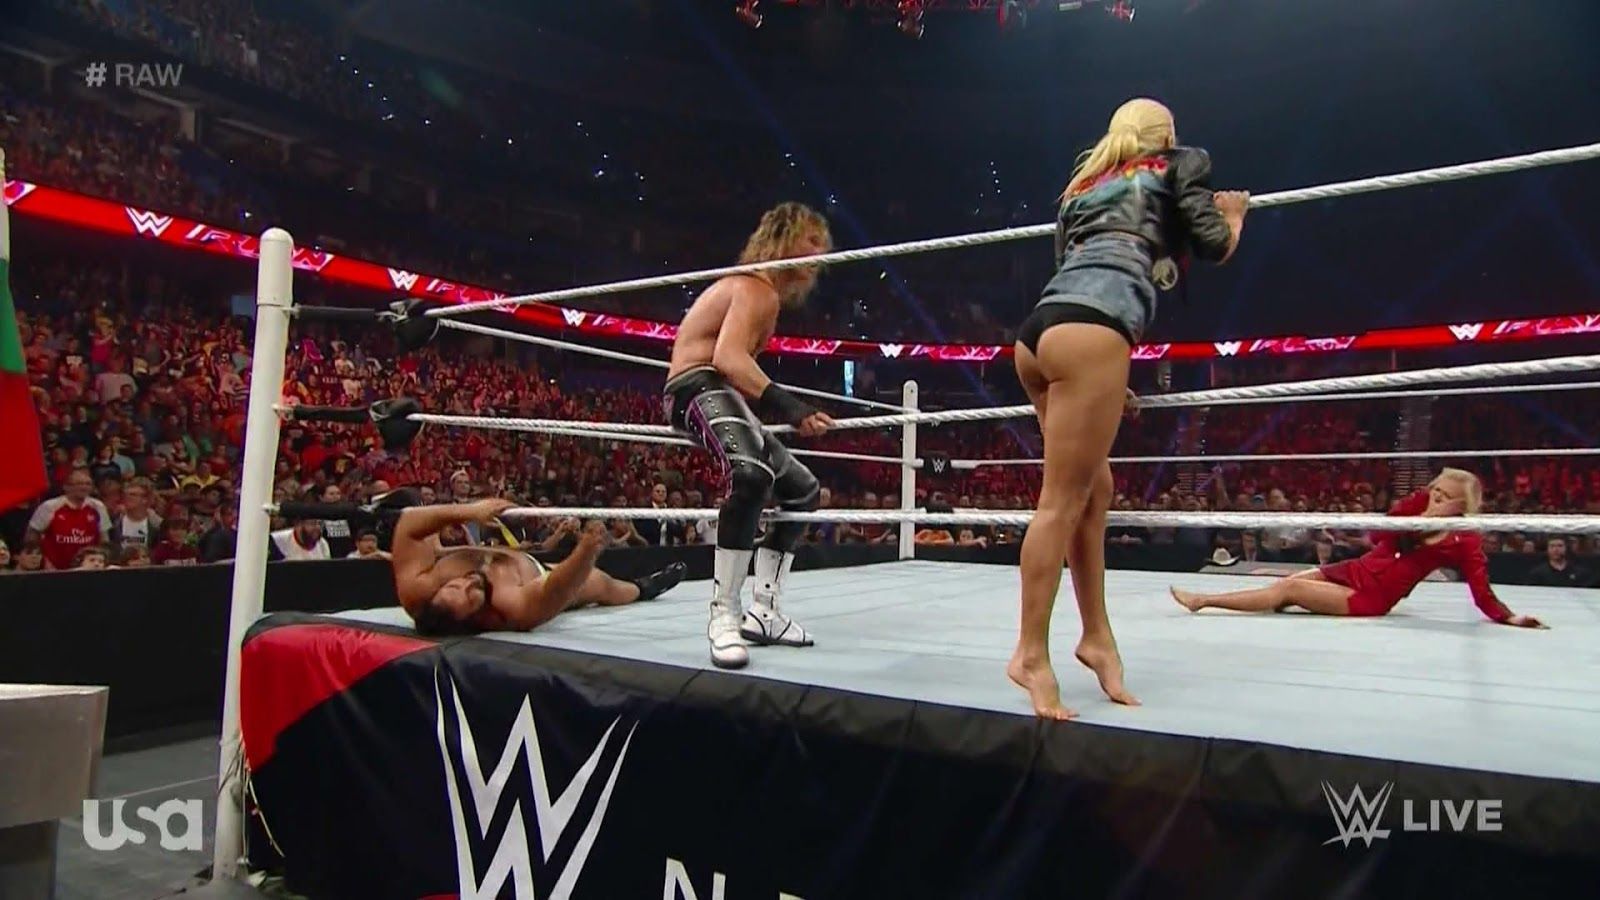 Boss recommendet wwe upskirt pictures